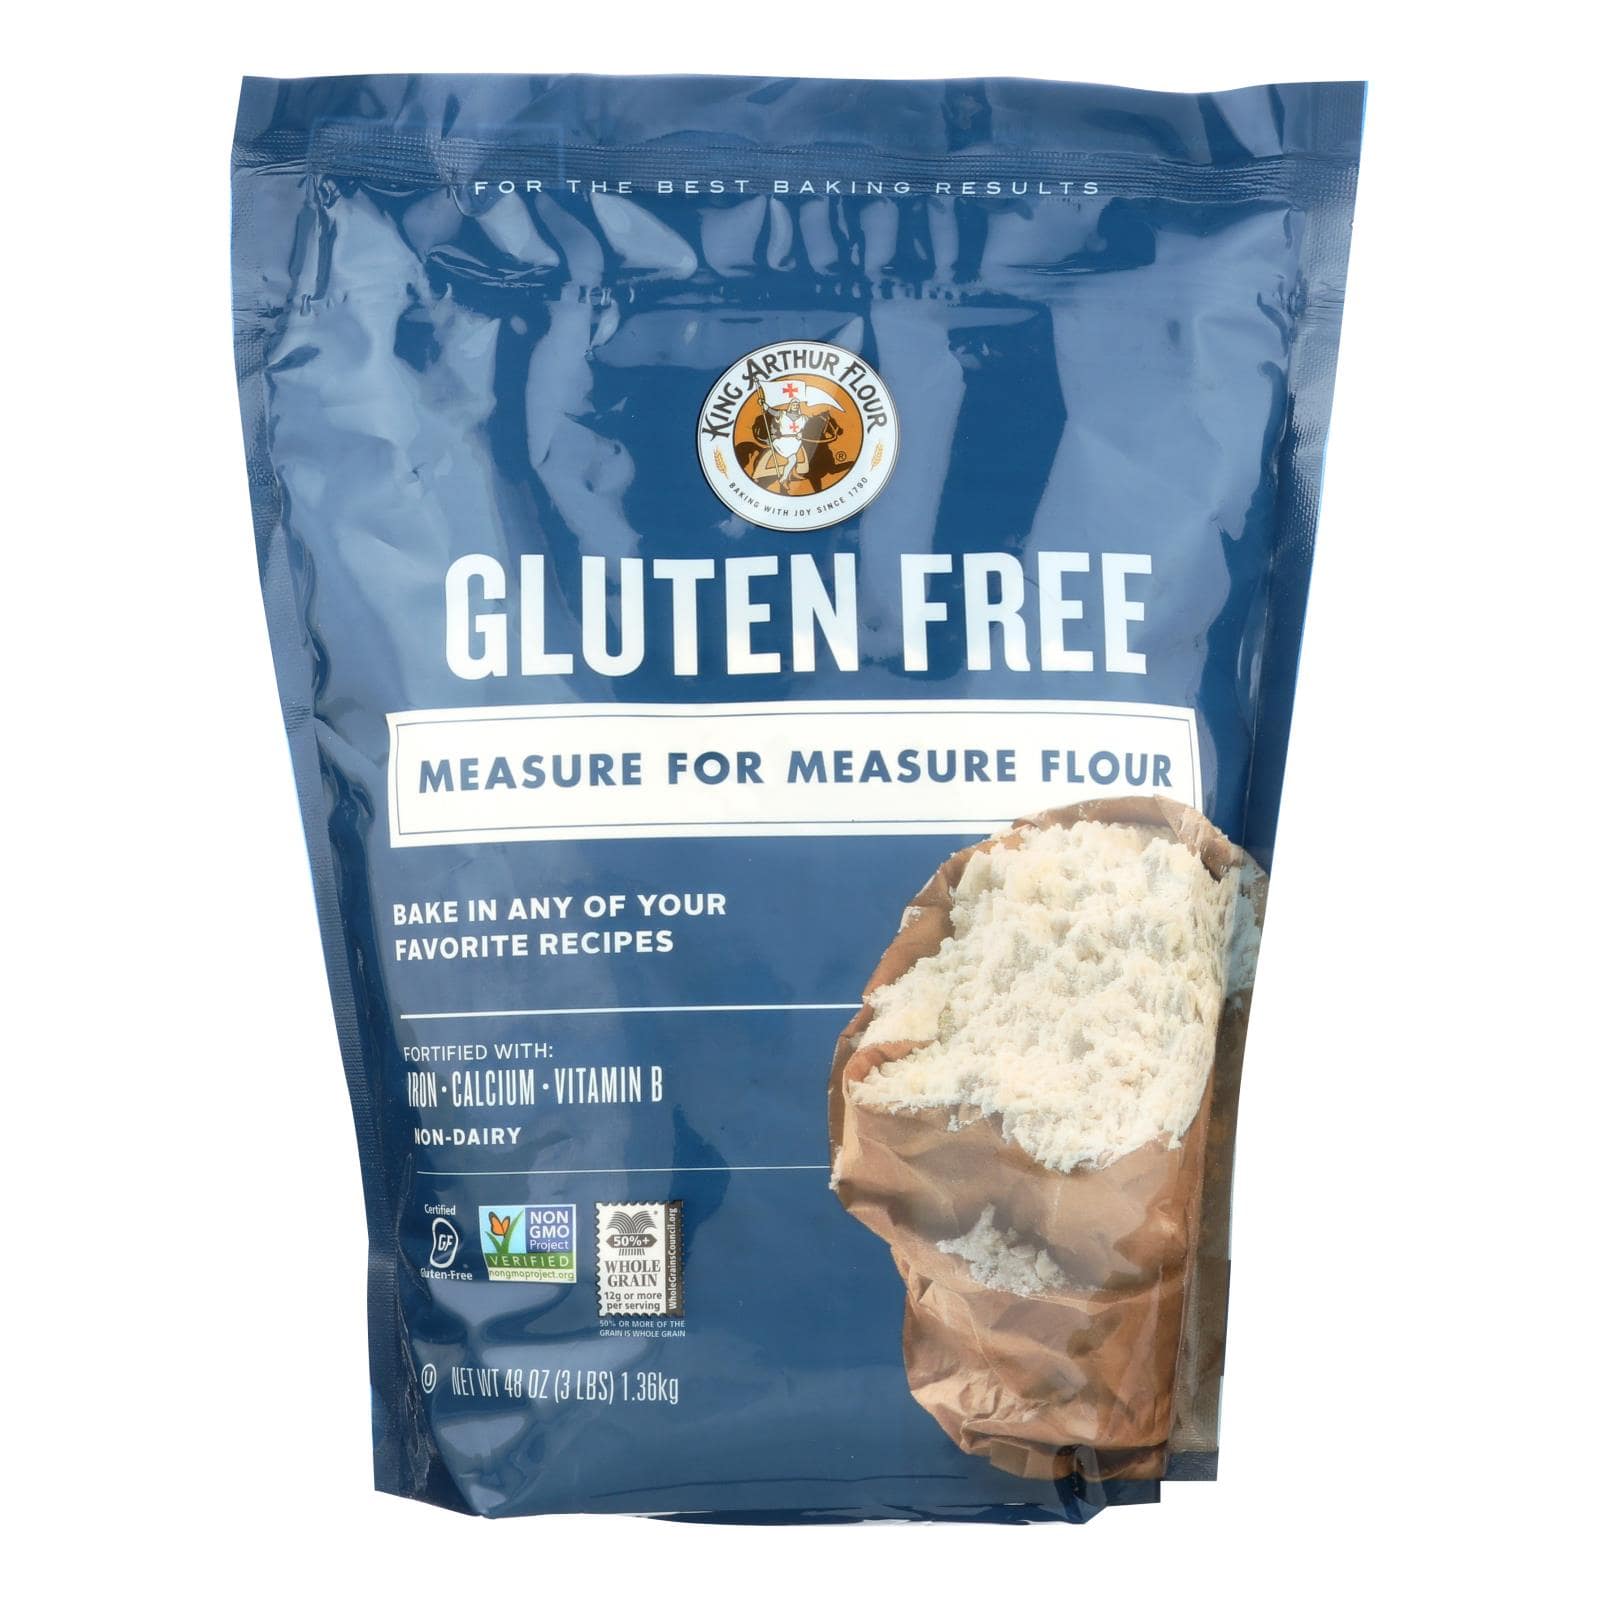 Buy King Arthur Measure For Measure Flour - Case Of 4 - 3 Lb.  at OnlyNaturals.us